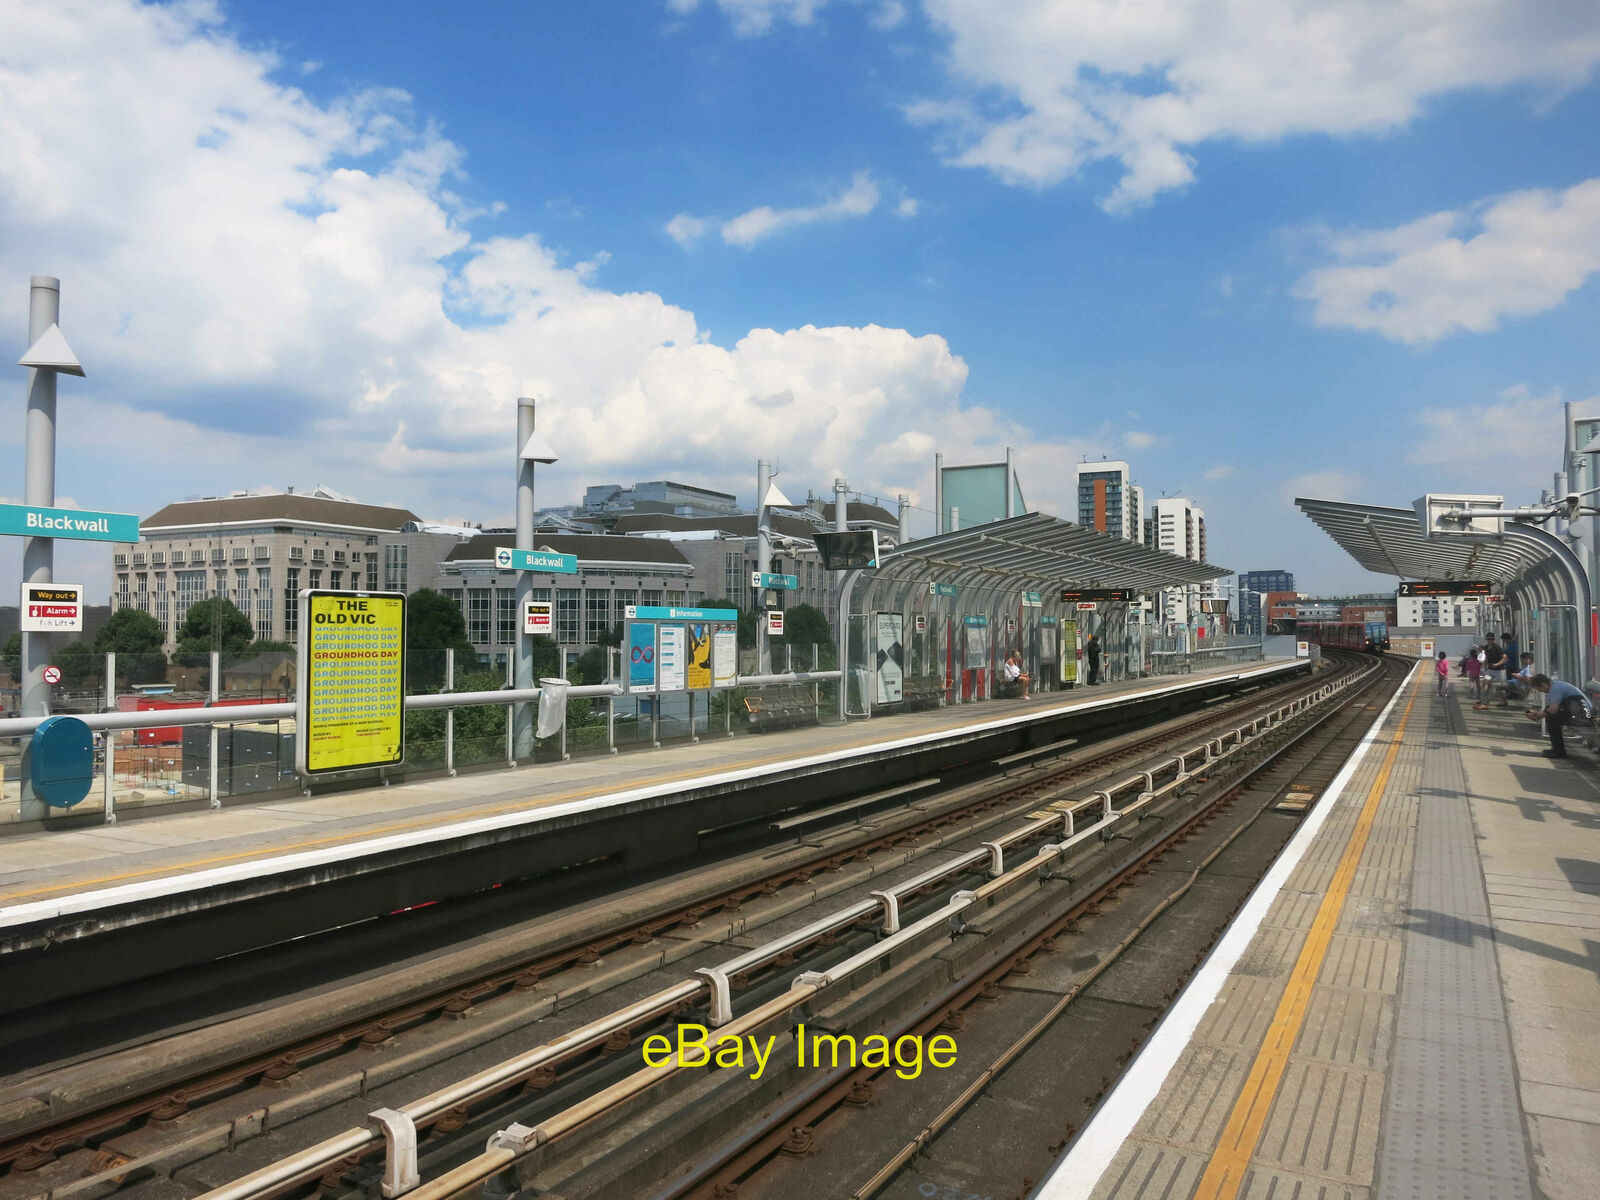 Photo 12x8 Blackwall Station Poplar "The DLR station opened, with the c2016